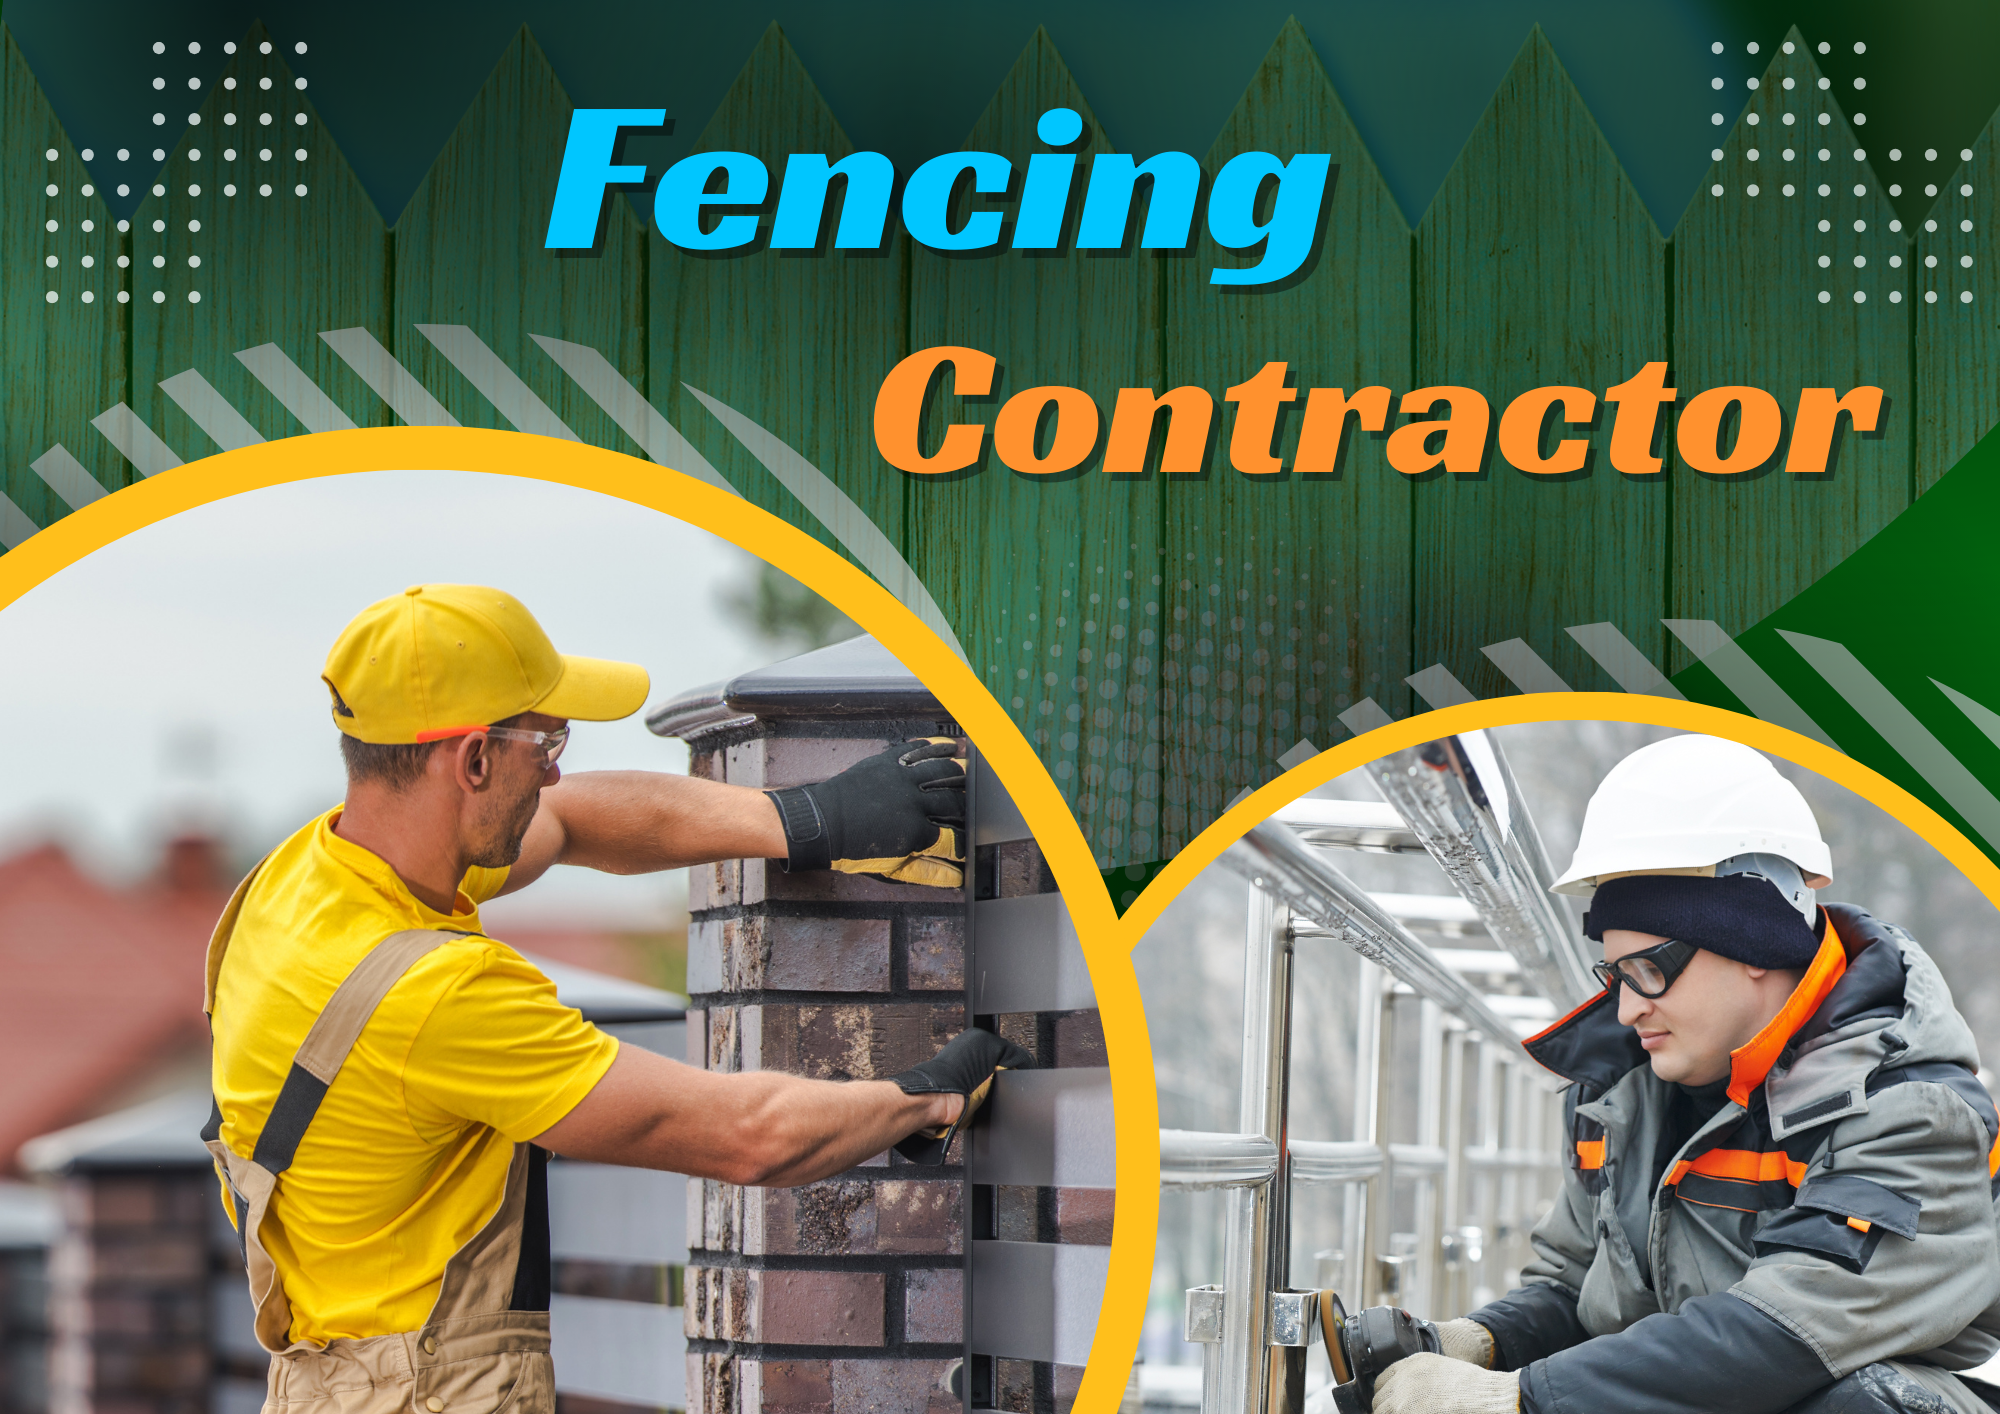 The Benefits of working with a fencing contractor